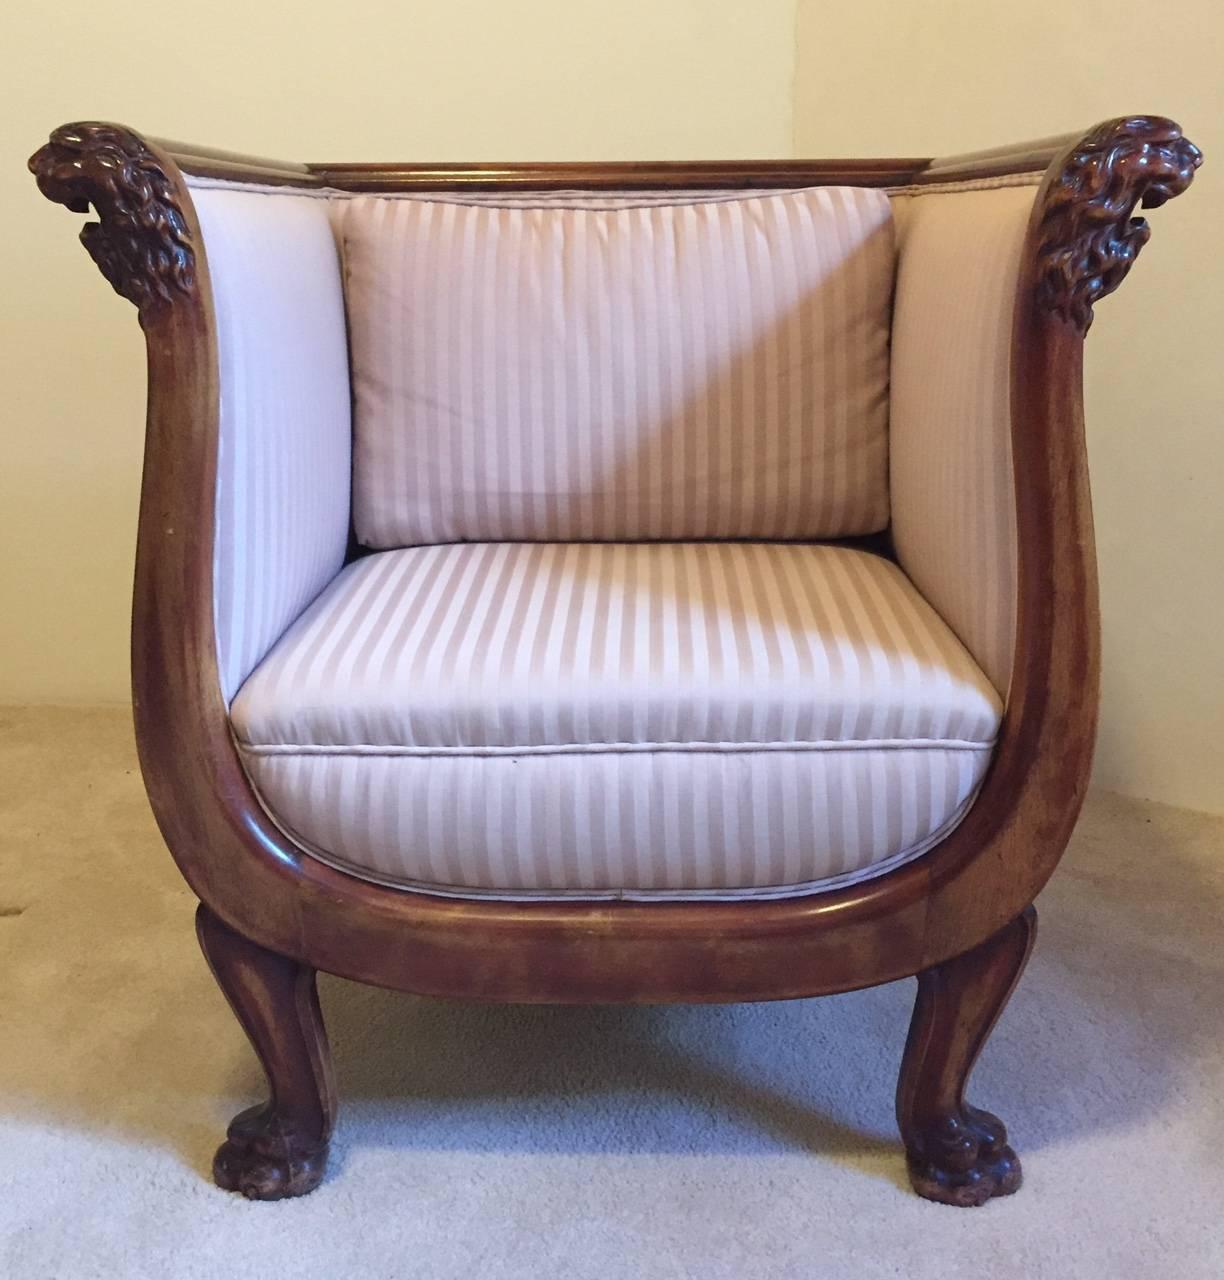 Empire Classical Sofa and Chair In Excellent Condition For Sale In Santa Fe, NM